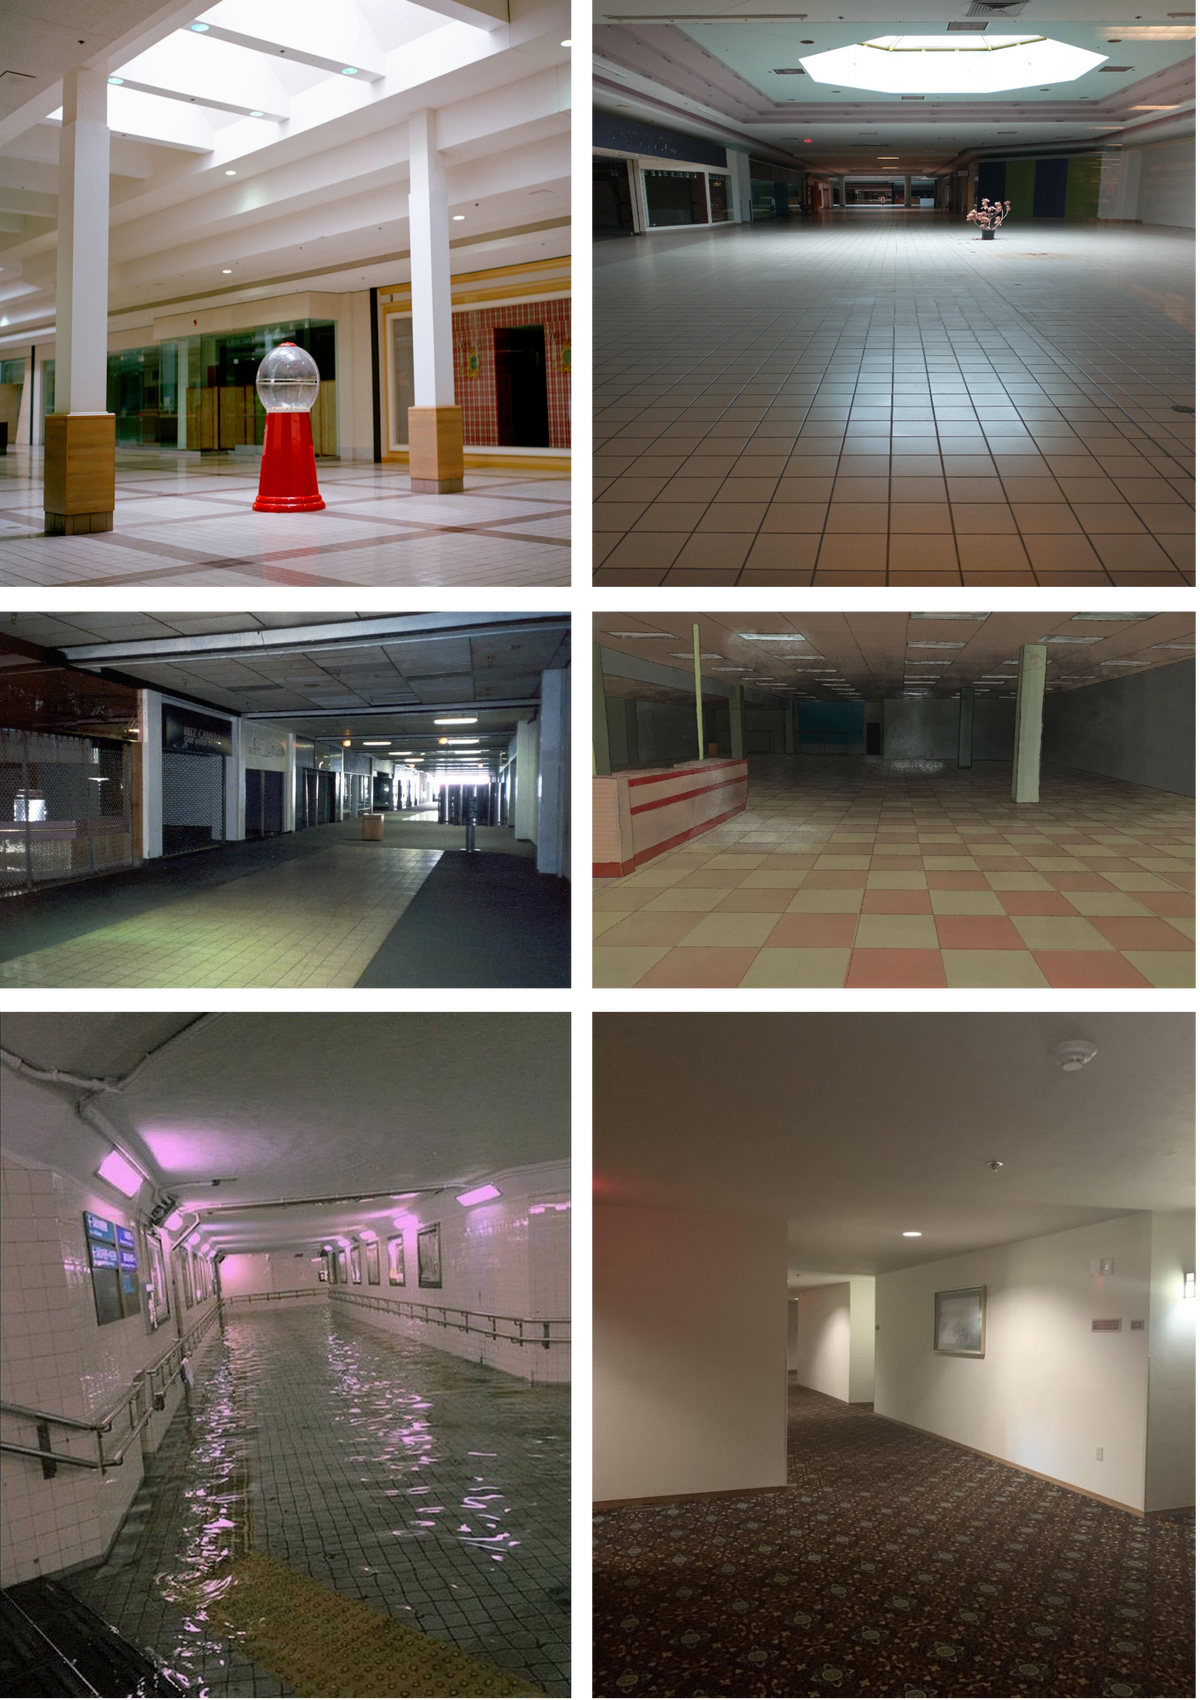 Liminal space (aesthetic) - Wikipedia